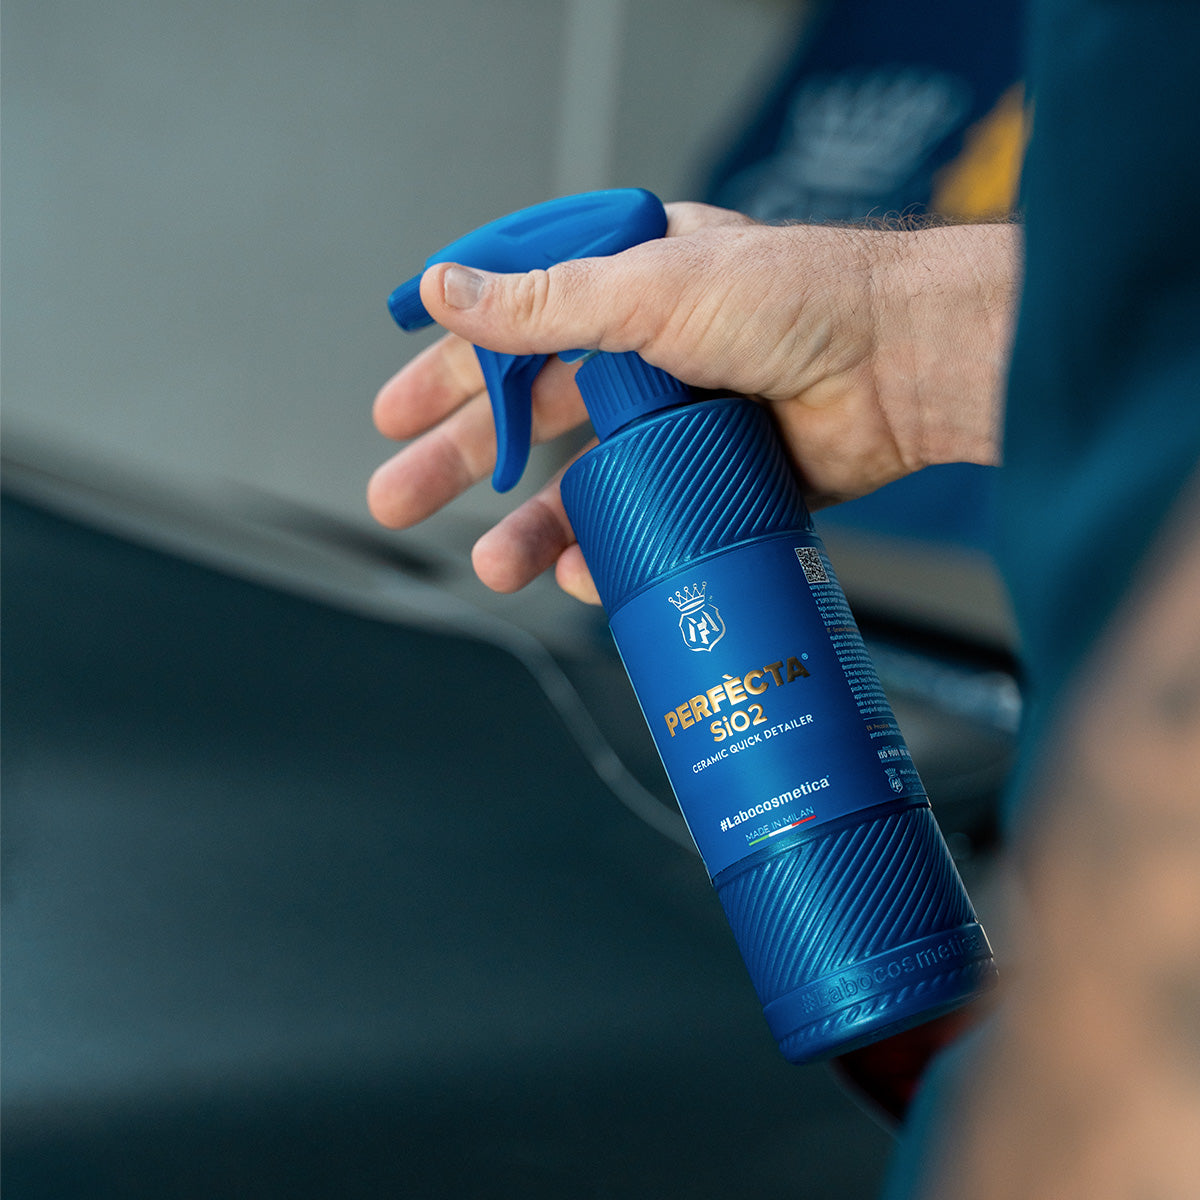 Labocosmetica Perfecta Ceramic Quick Detailer. SiO2 Quick Detailer. High gloss and shine. wet look. blue bottle with see through cap. Labocosmetica Cork Ireland